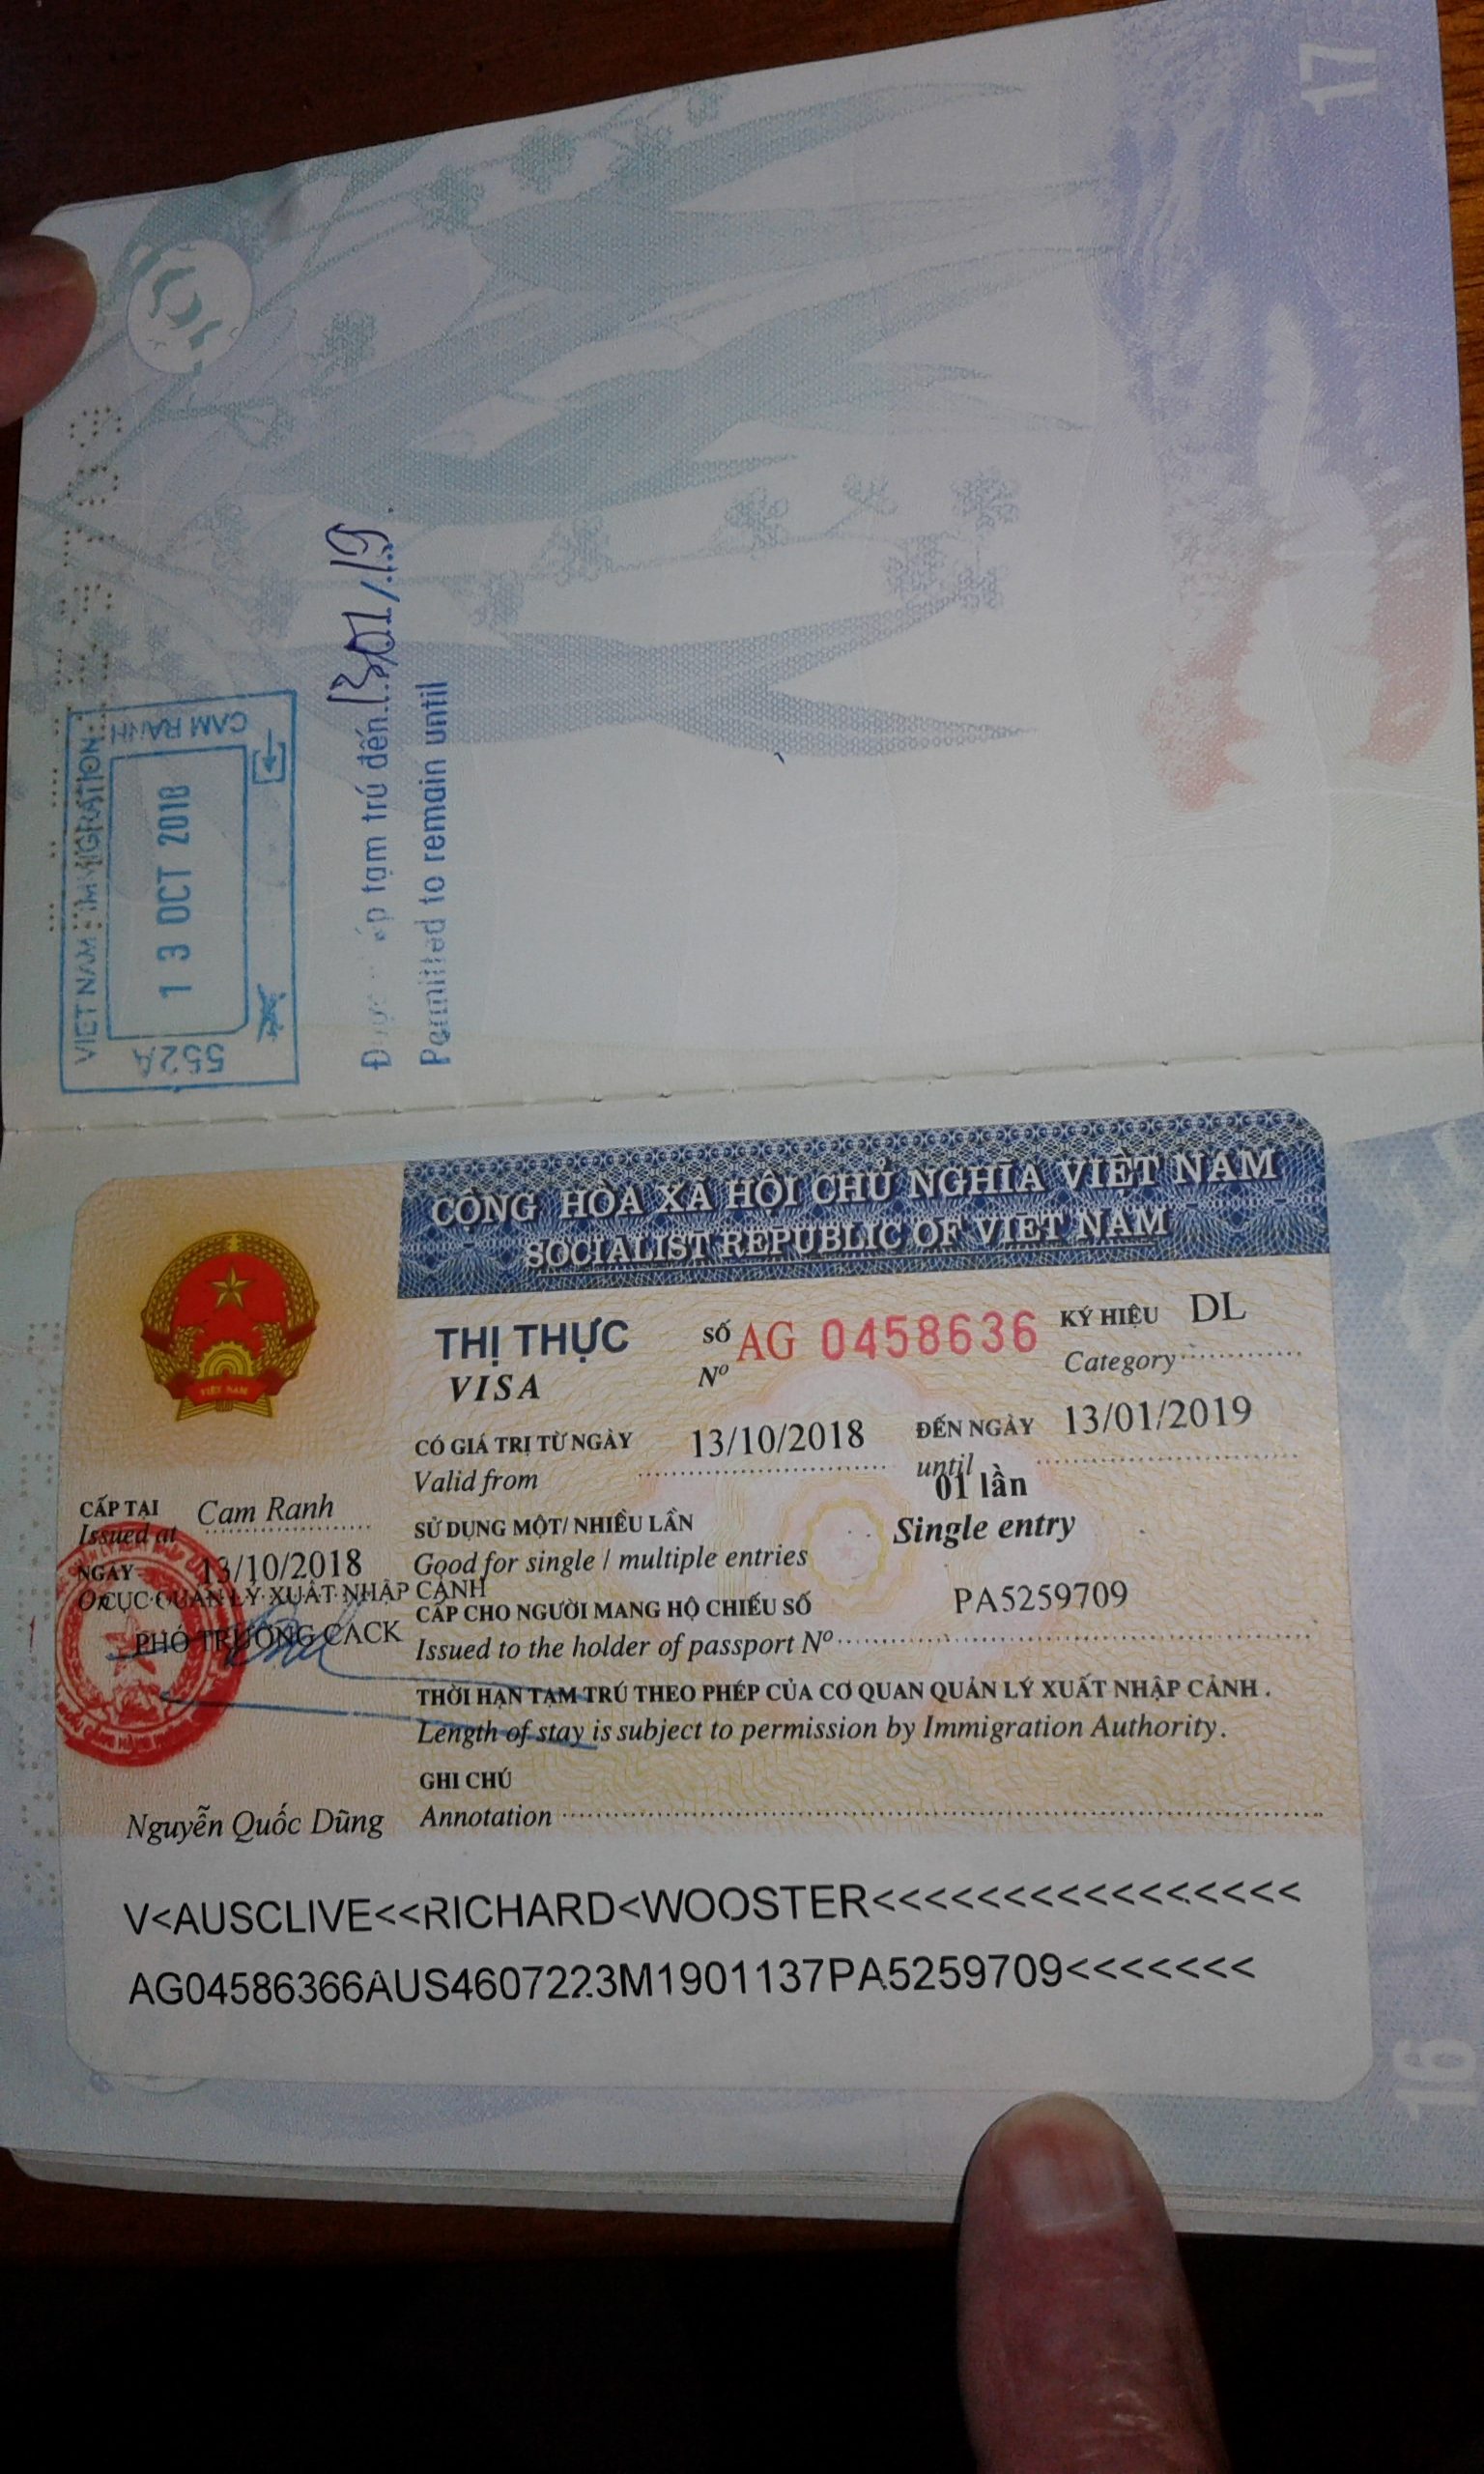 How Much Does It Cost For Three Month Single Entry Visa To Vietnam?